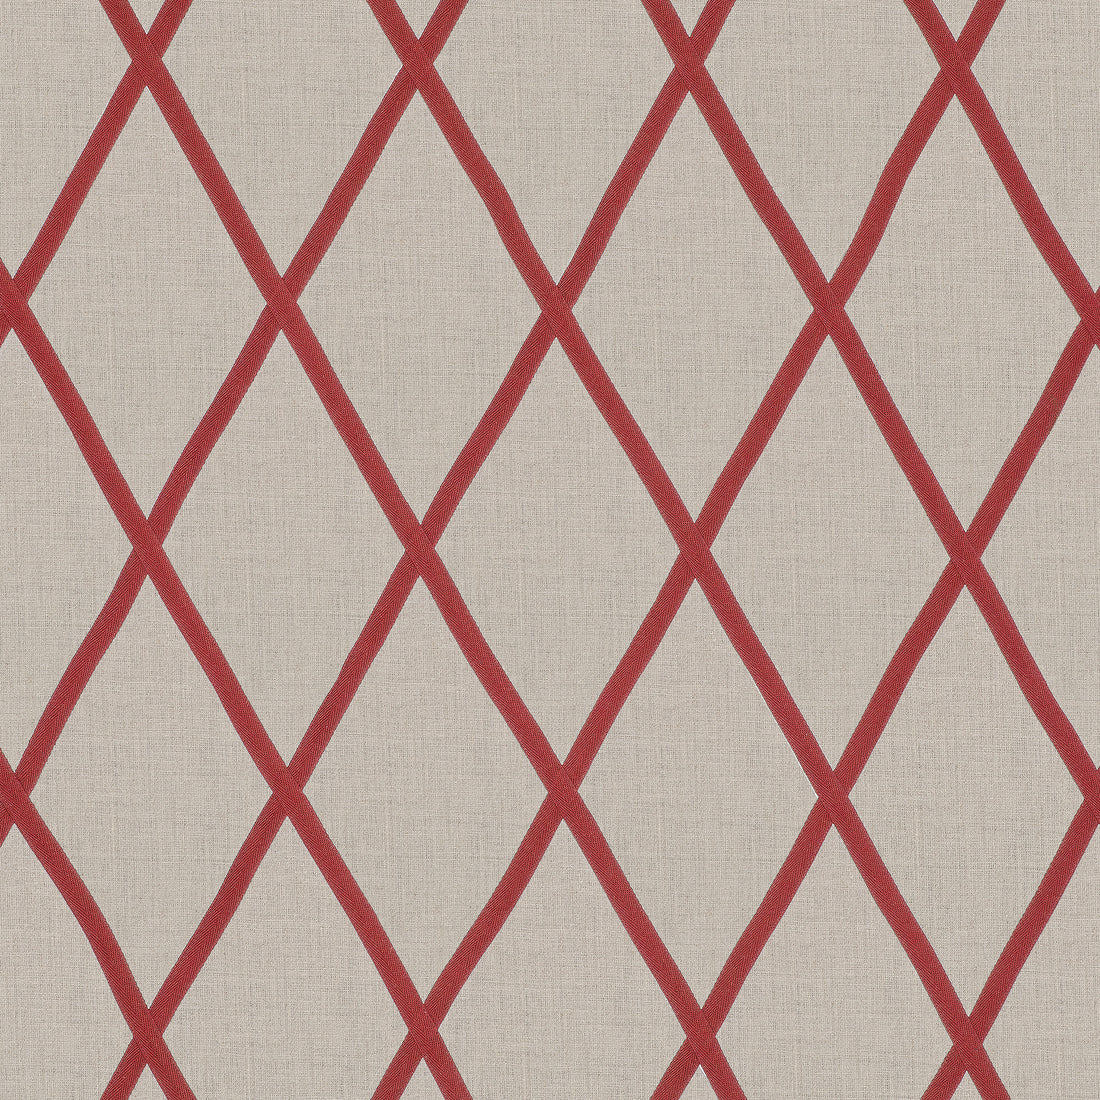 Tarascon Trellis Applique fabric in red on natural color - pattern number AW78710 - by Anna French in the Palampore collection